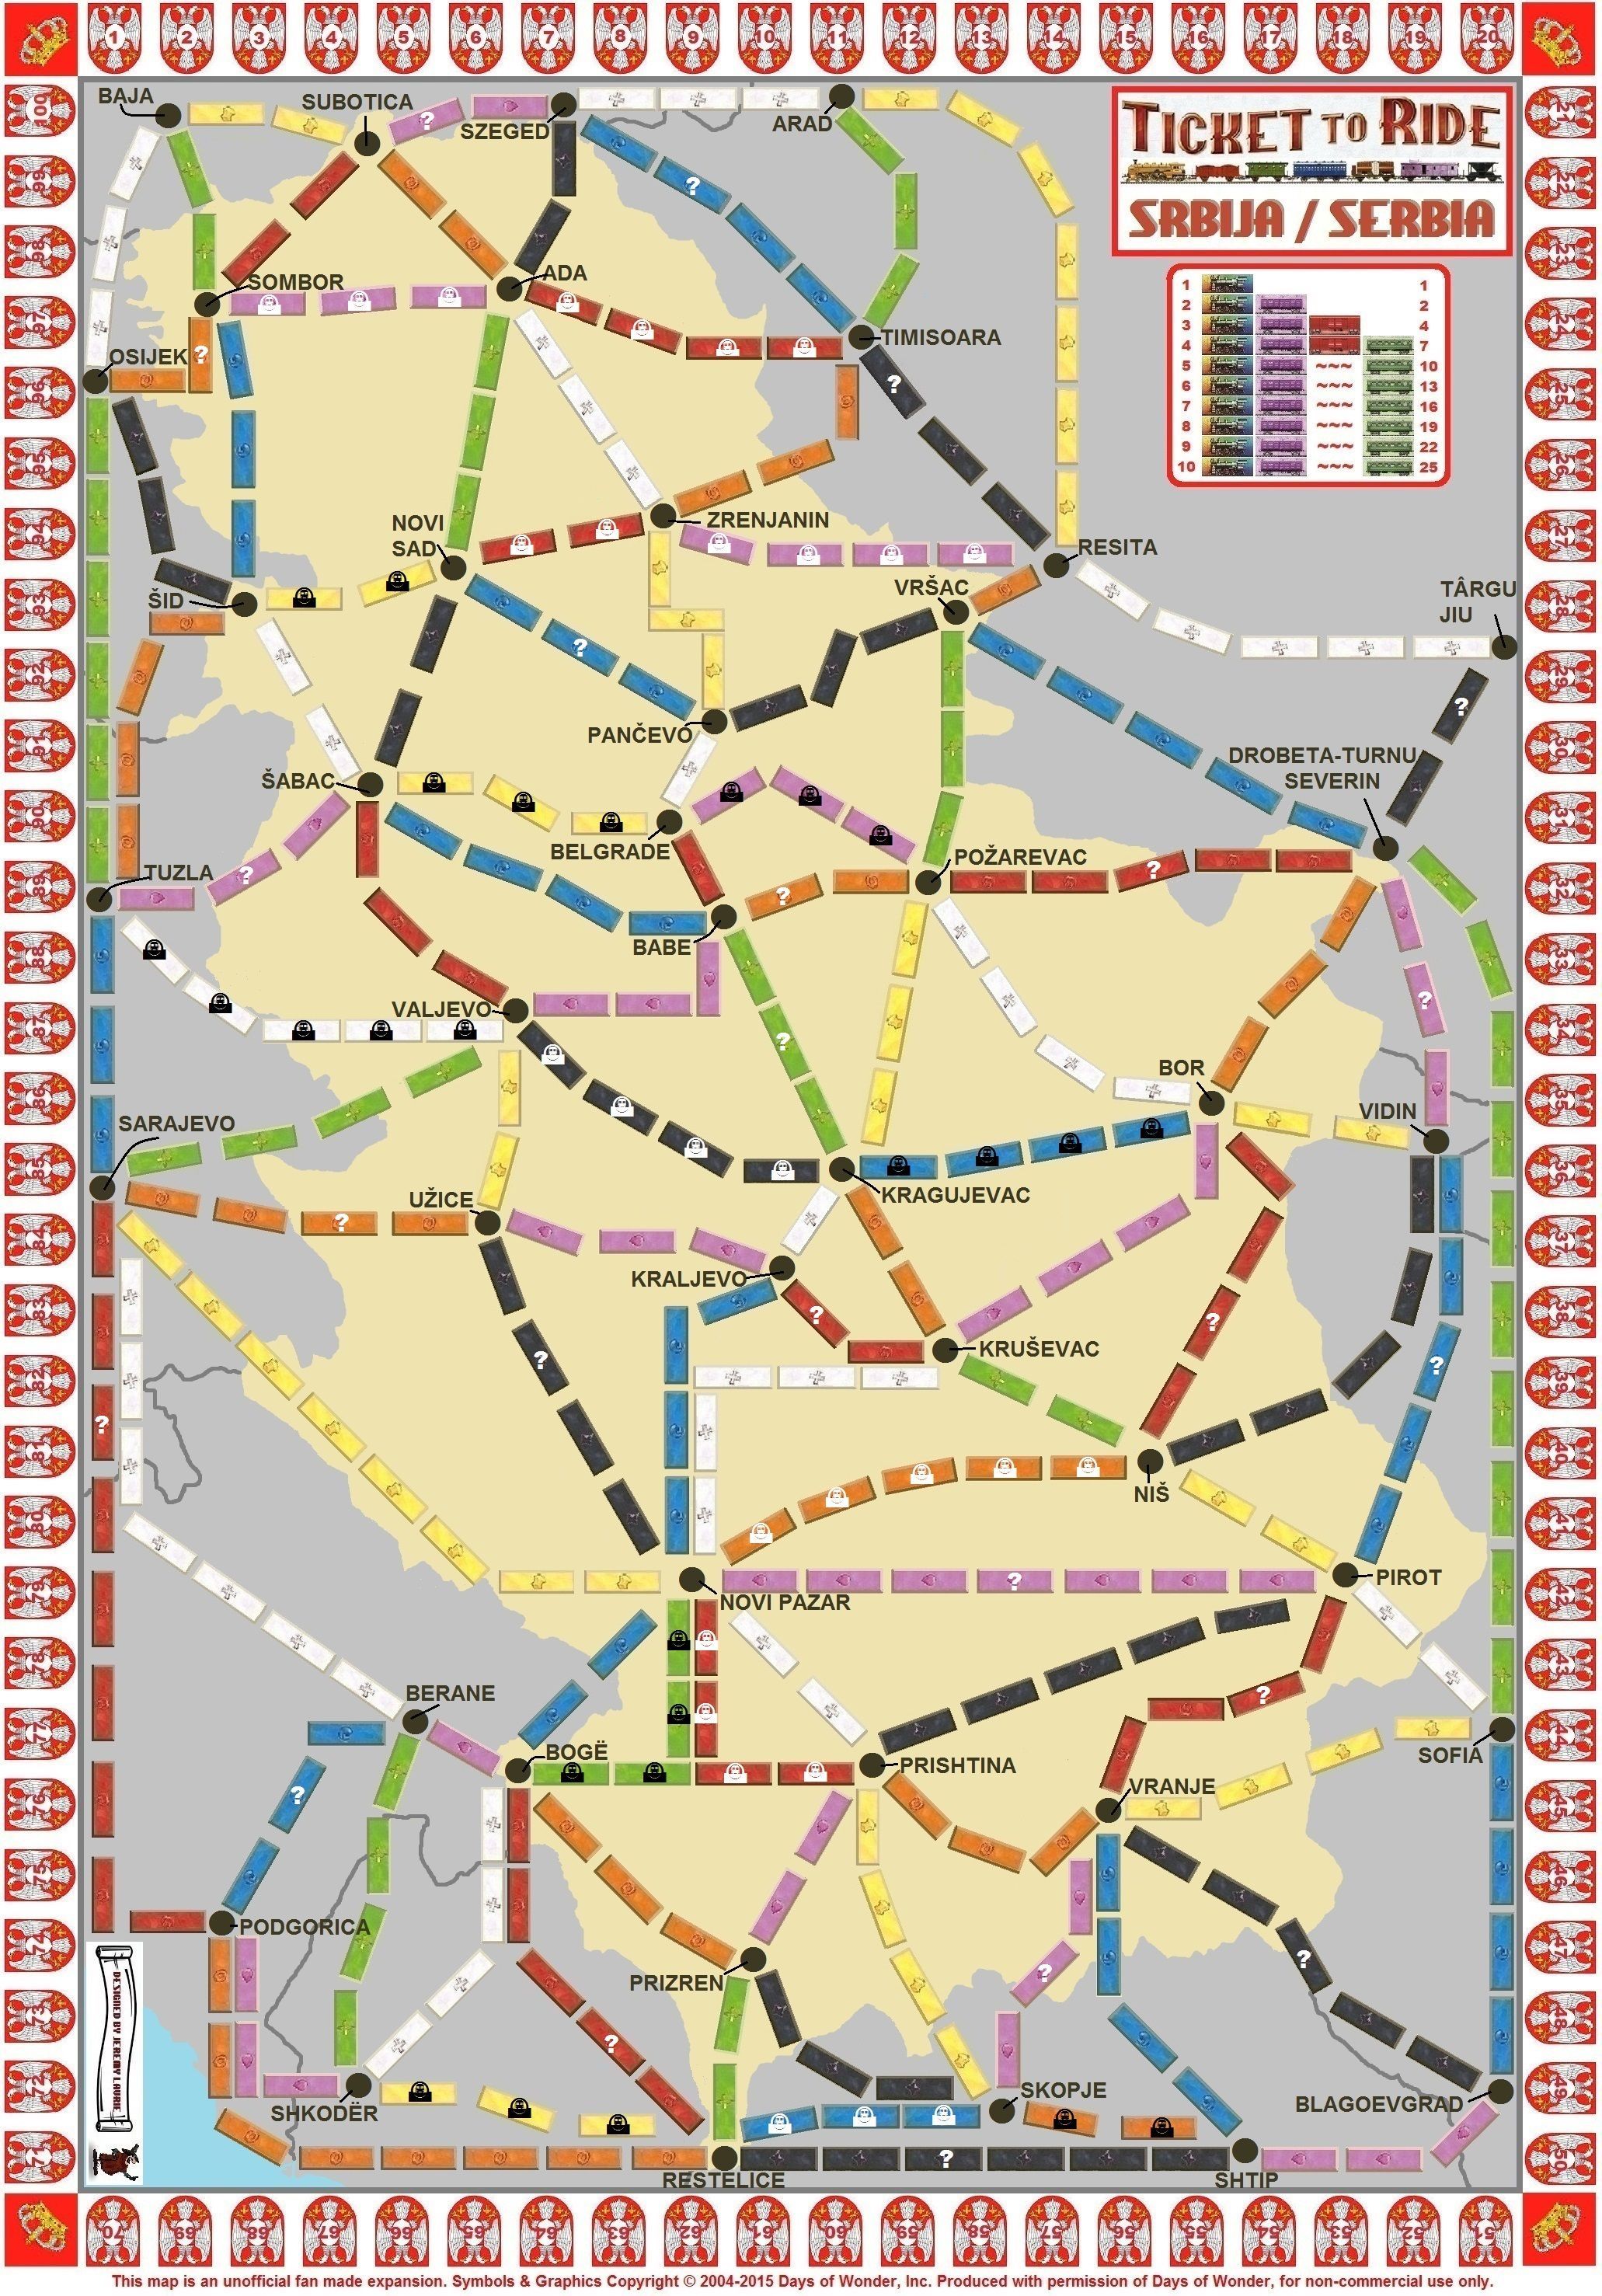 Serbia (fan expansion for Ticket to Ride)